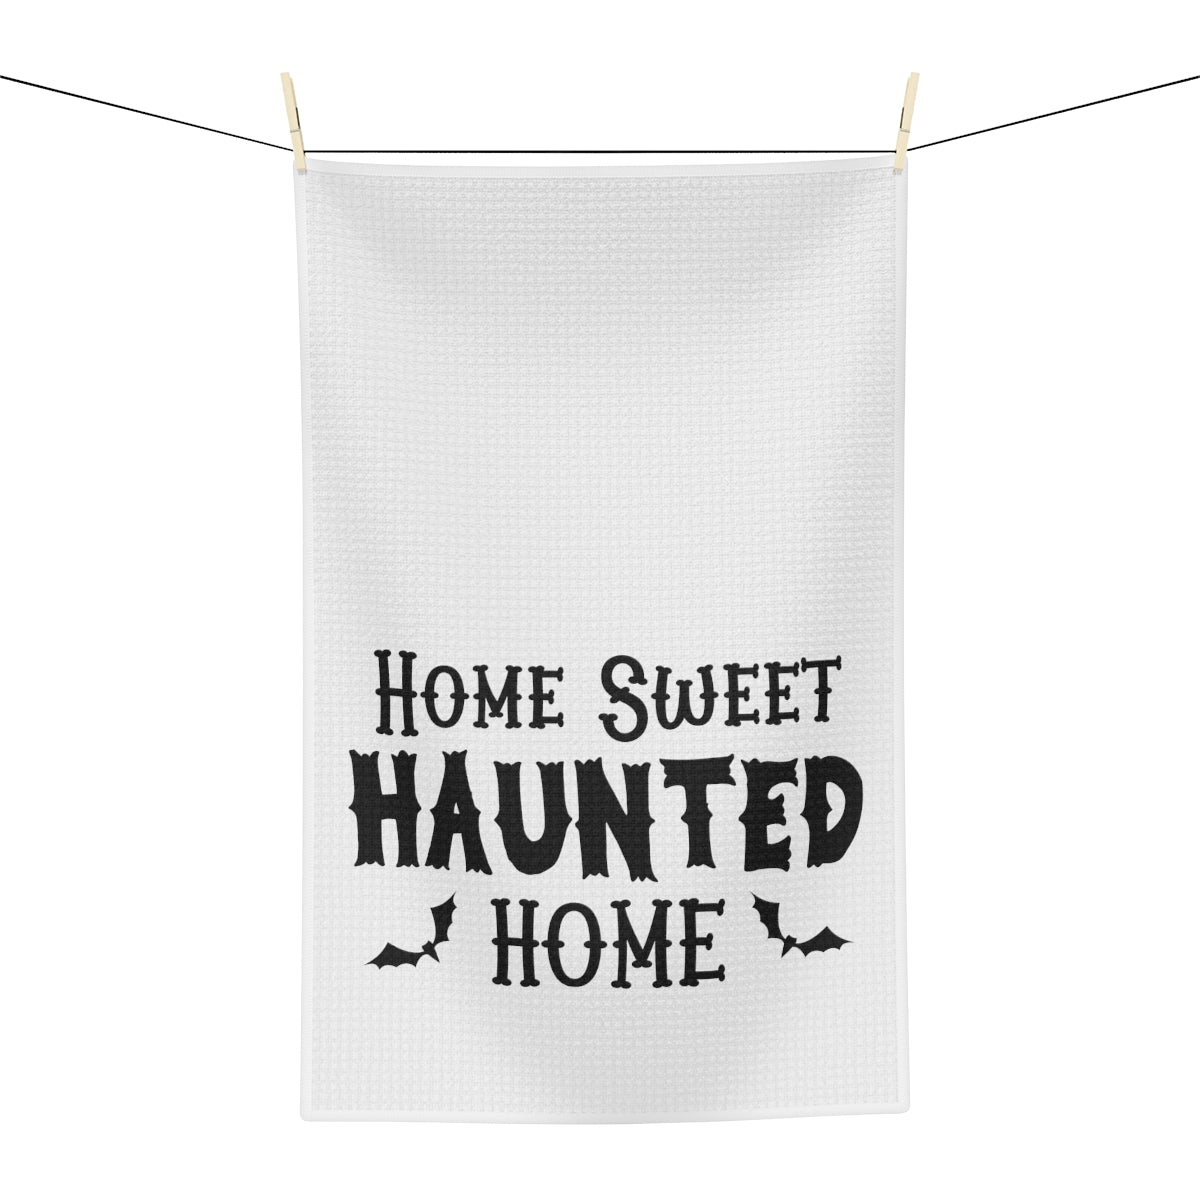 Home Sweet Haunted Home Tea Towel - Witchy Kitchens